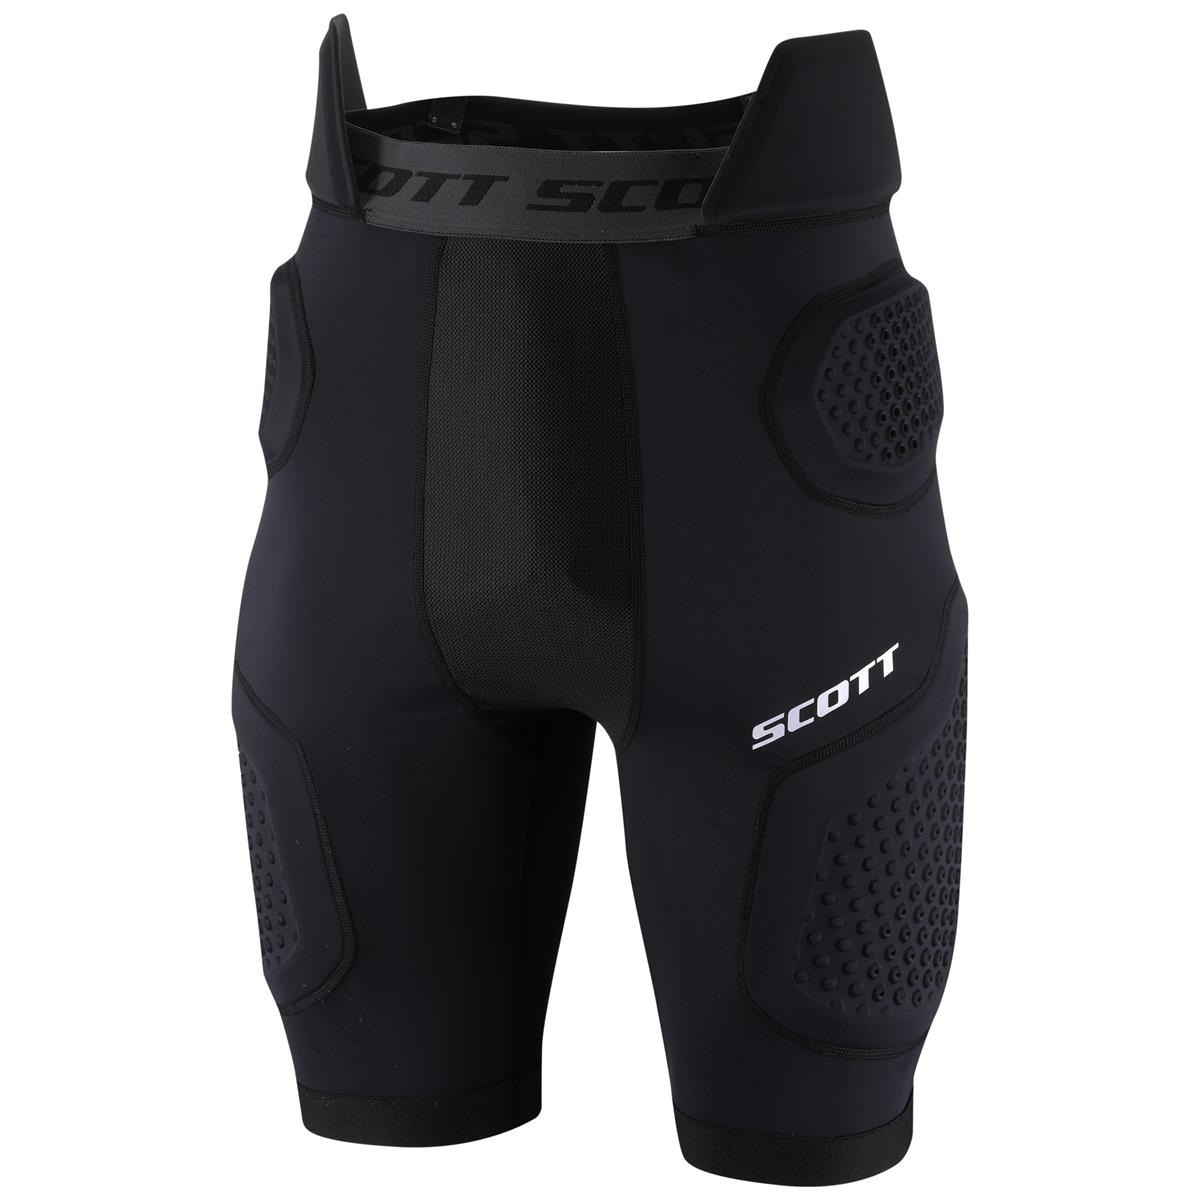 Short protector Softcon air black - Size M